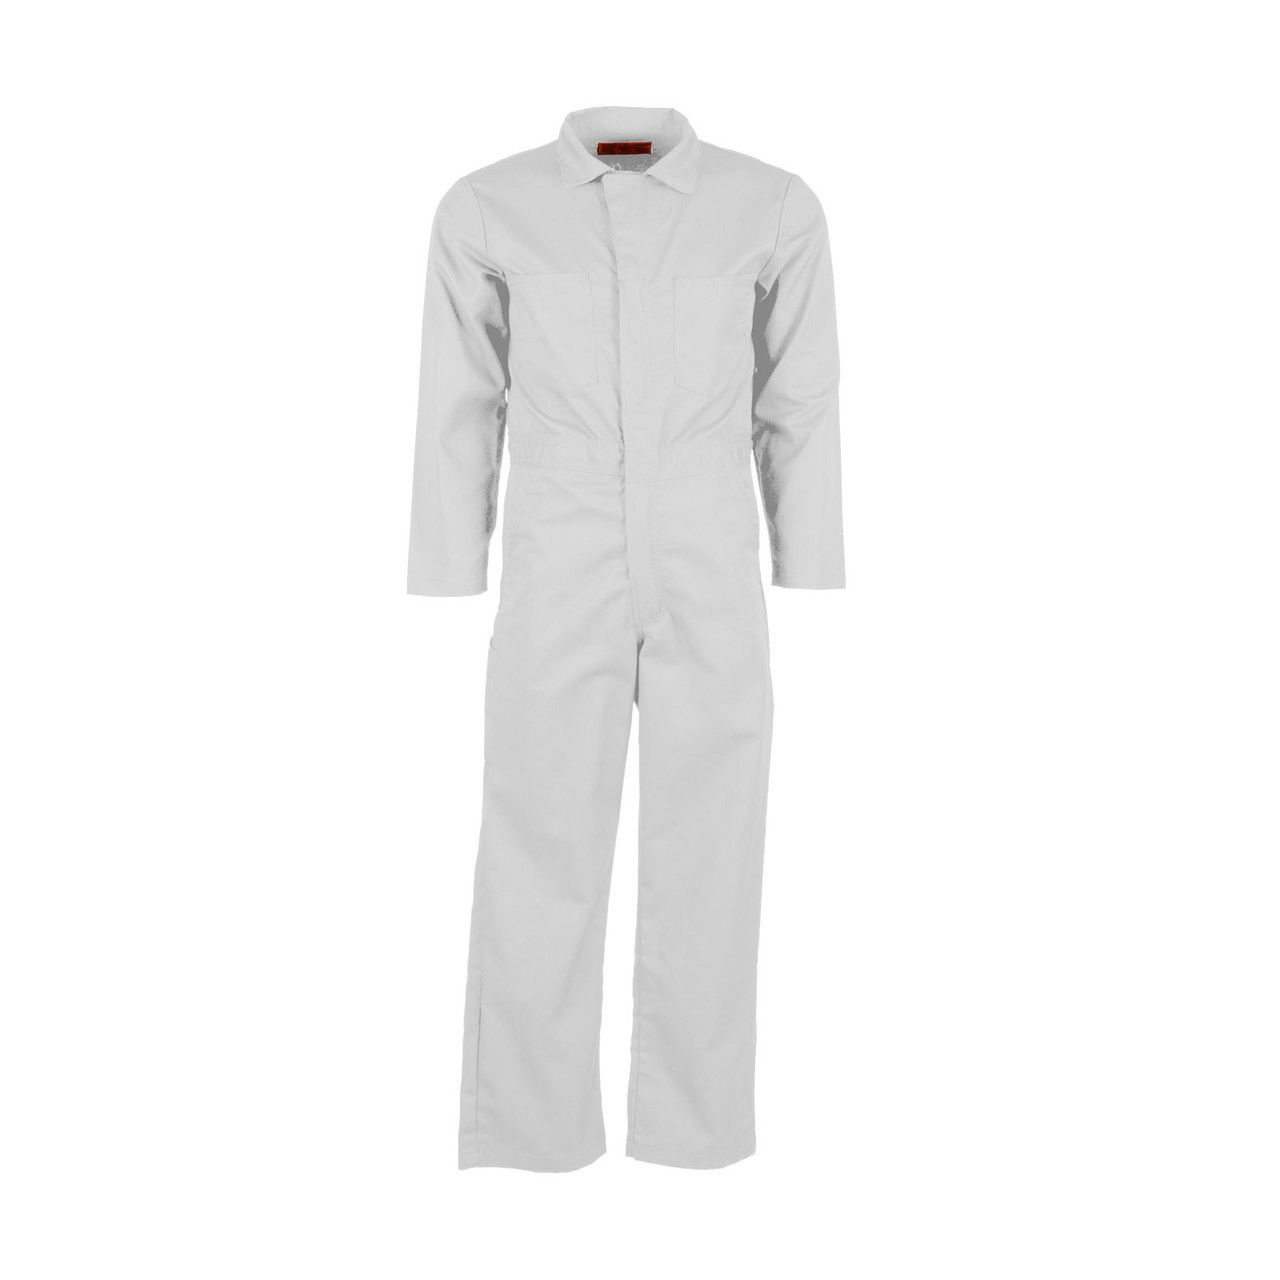 What is the fabric composition of the white coveralls in the CV10WH by Pinnacle Textile?